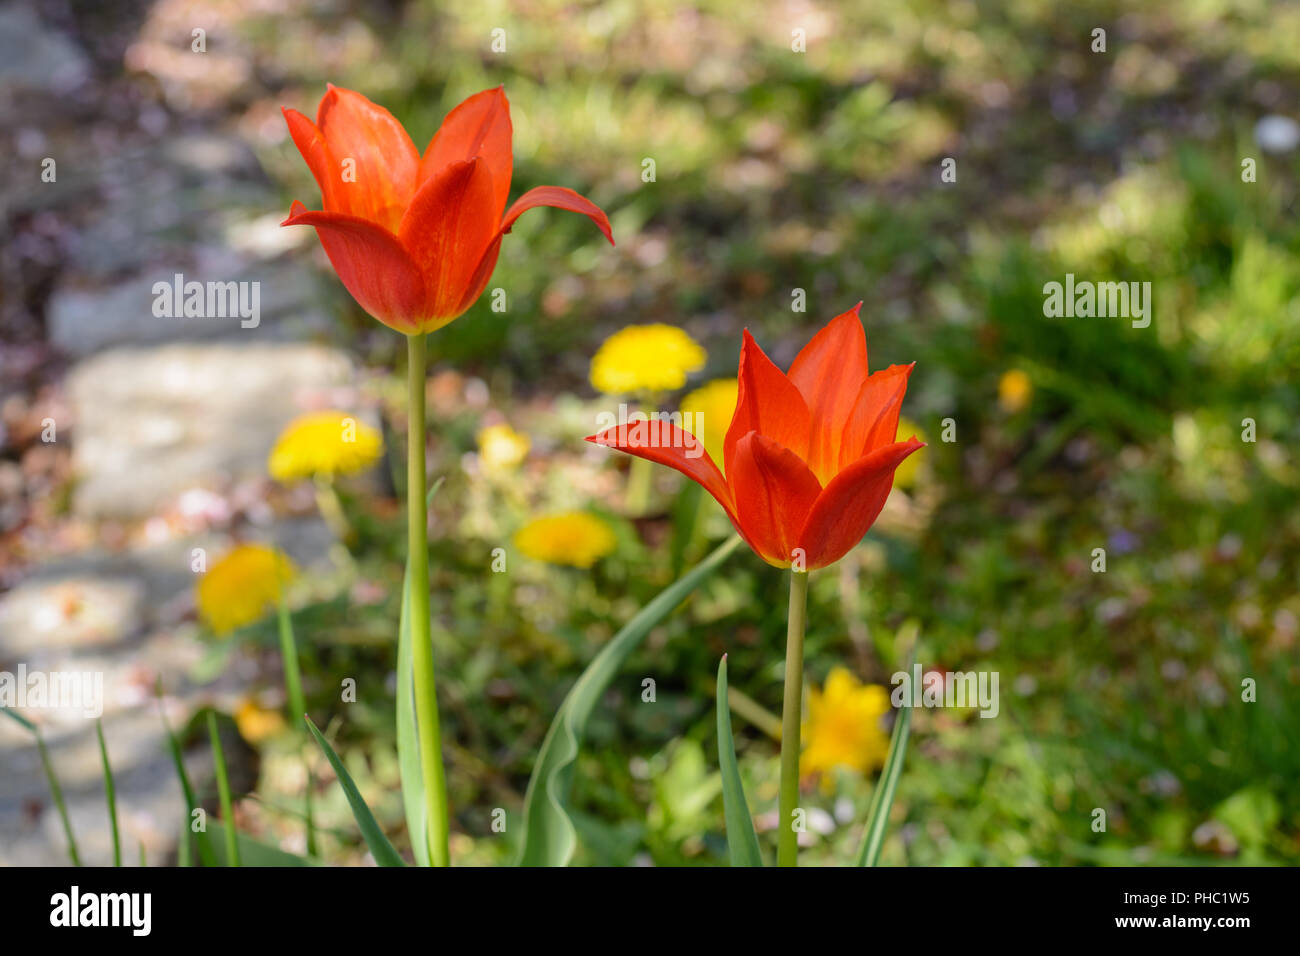 Lily-shaped red-flowering tulips in the garden next to dandelion Stock Photo